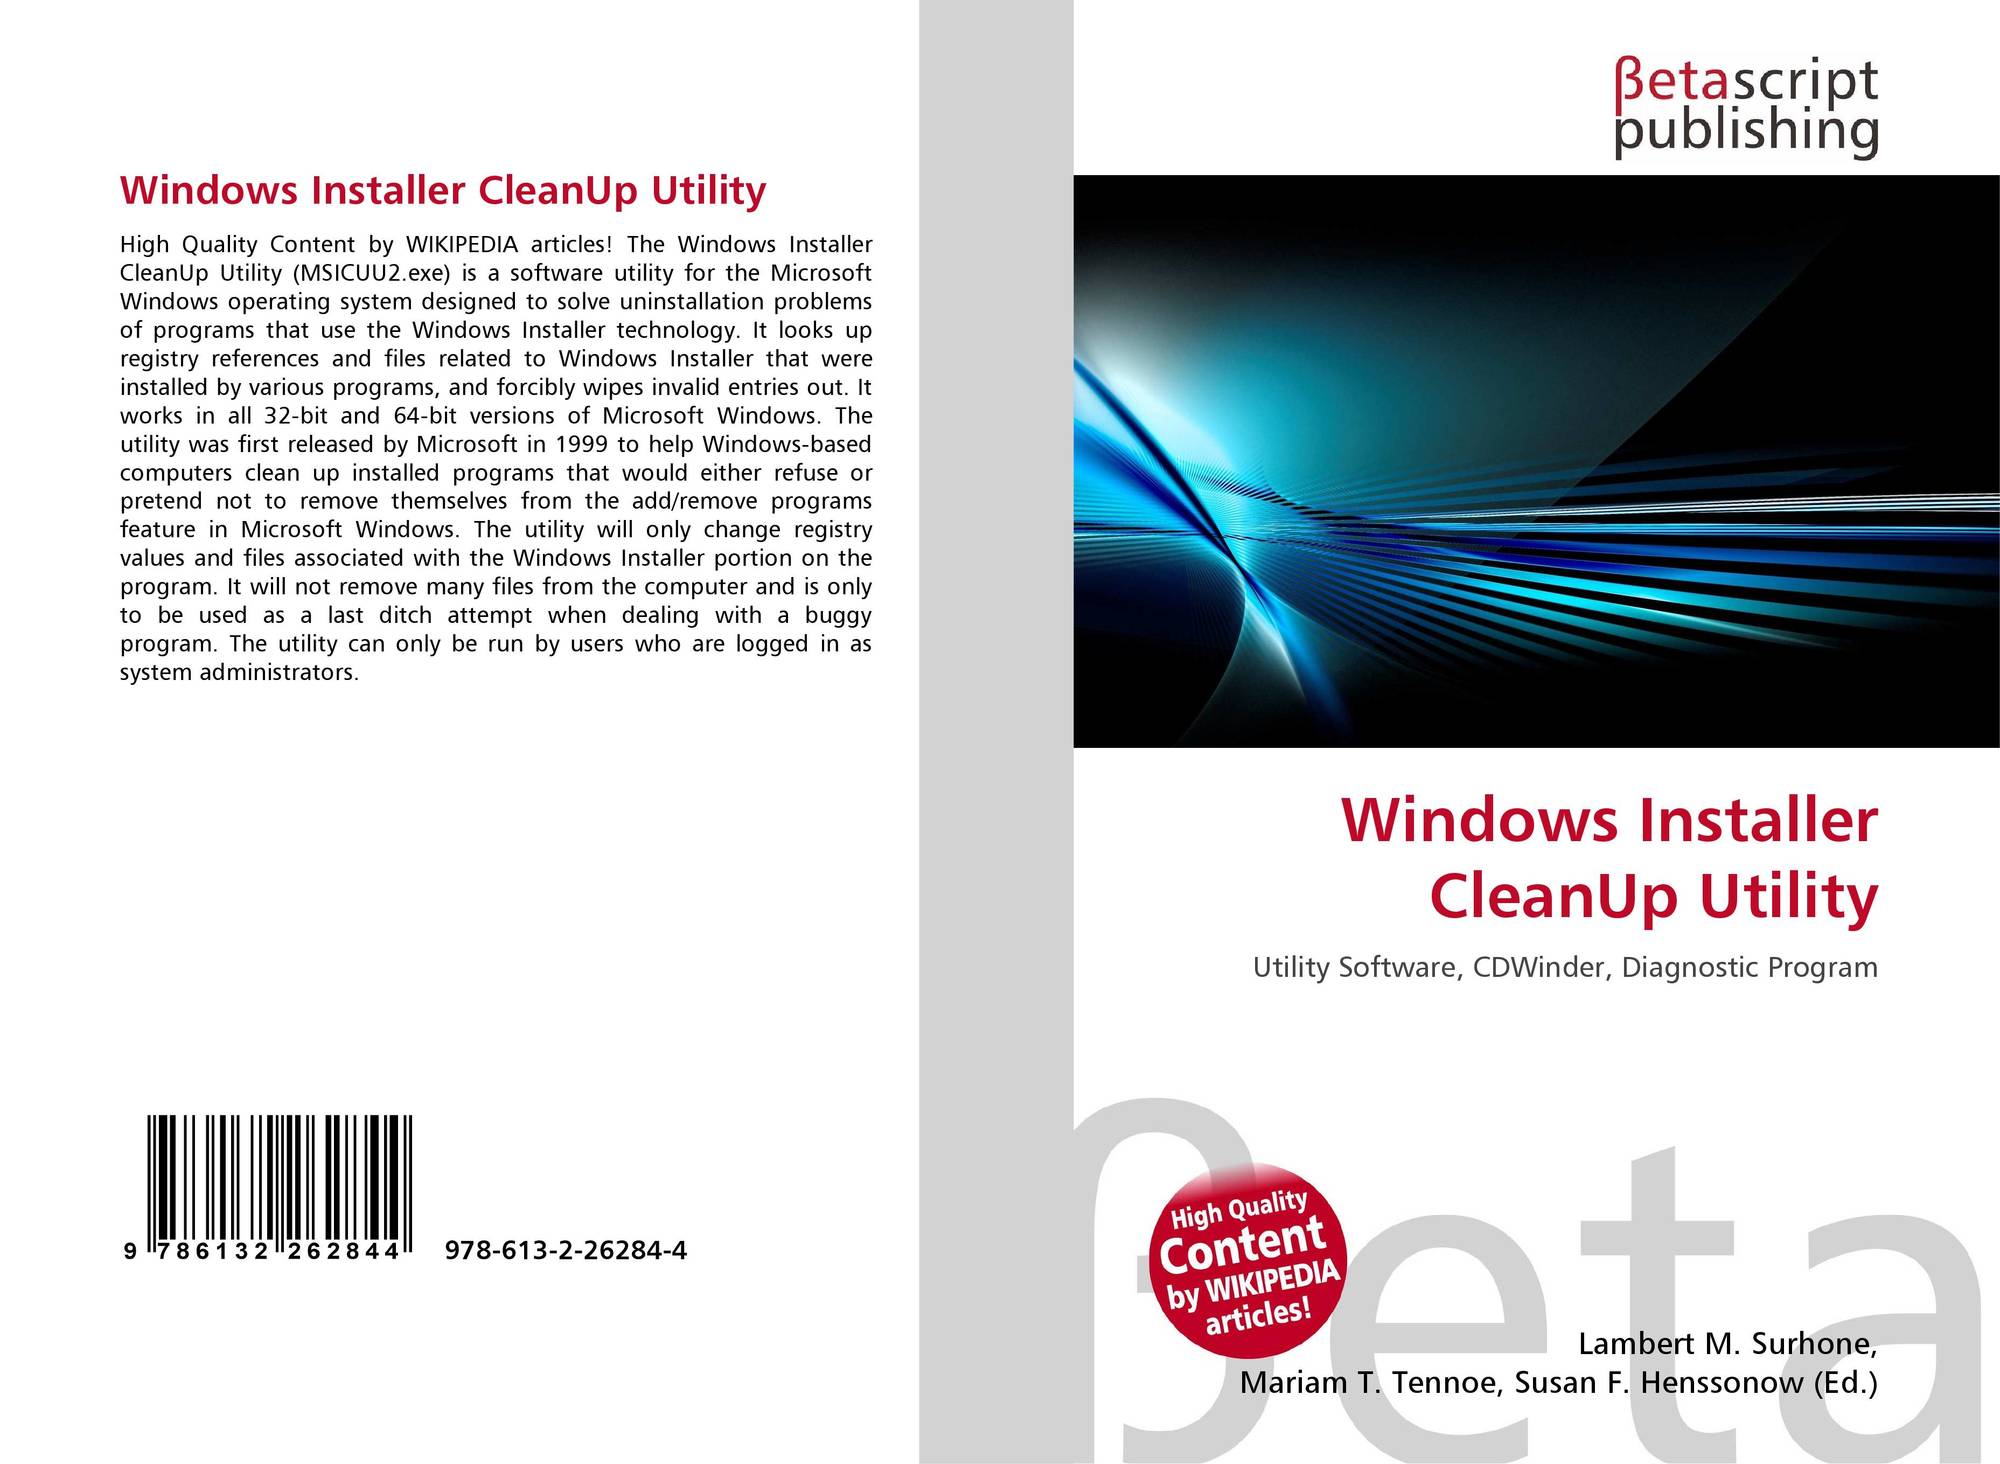 windows installer cleanup utility wikipedia